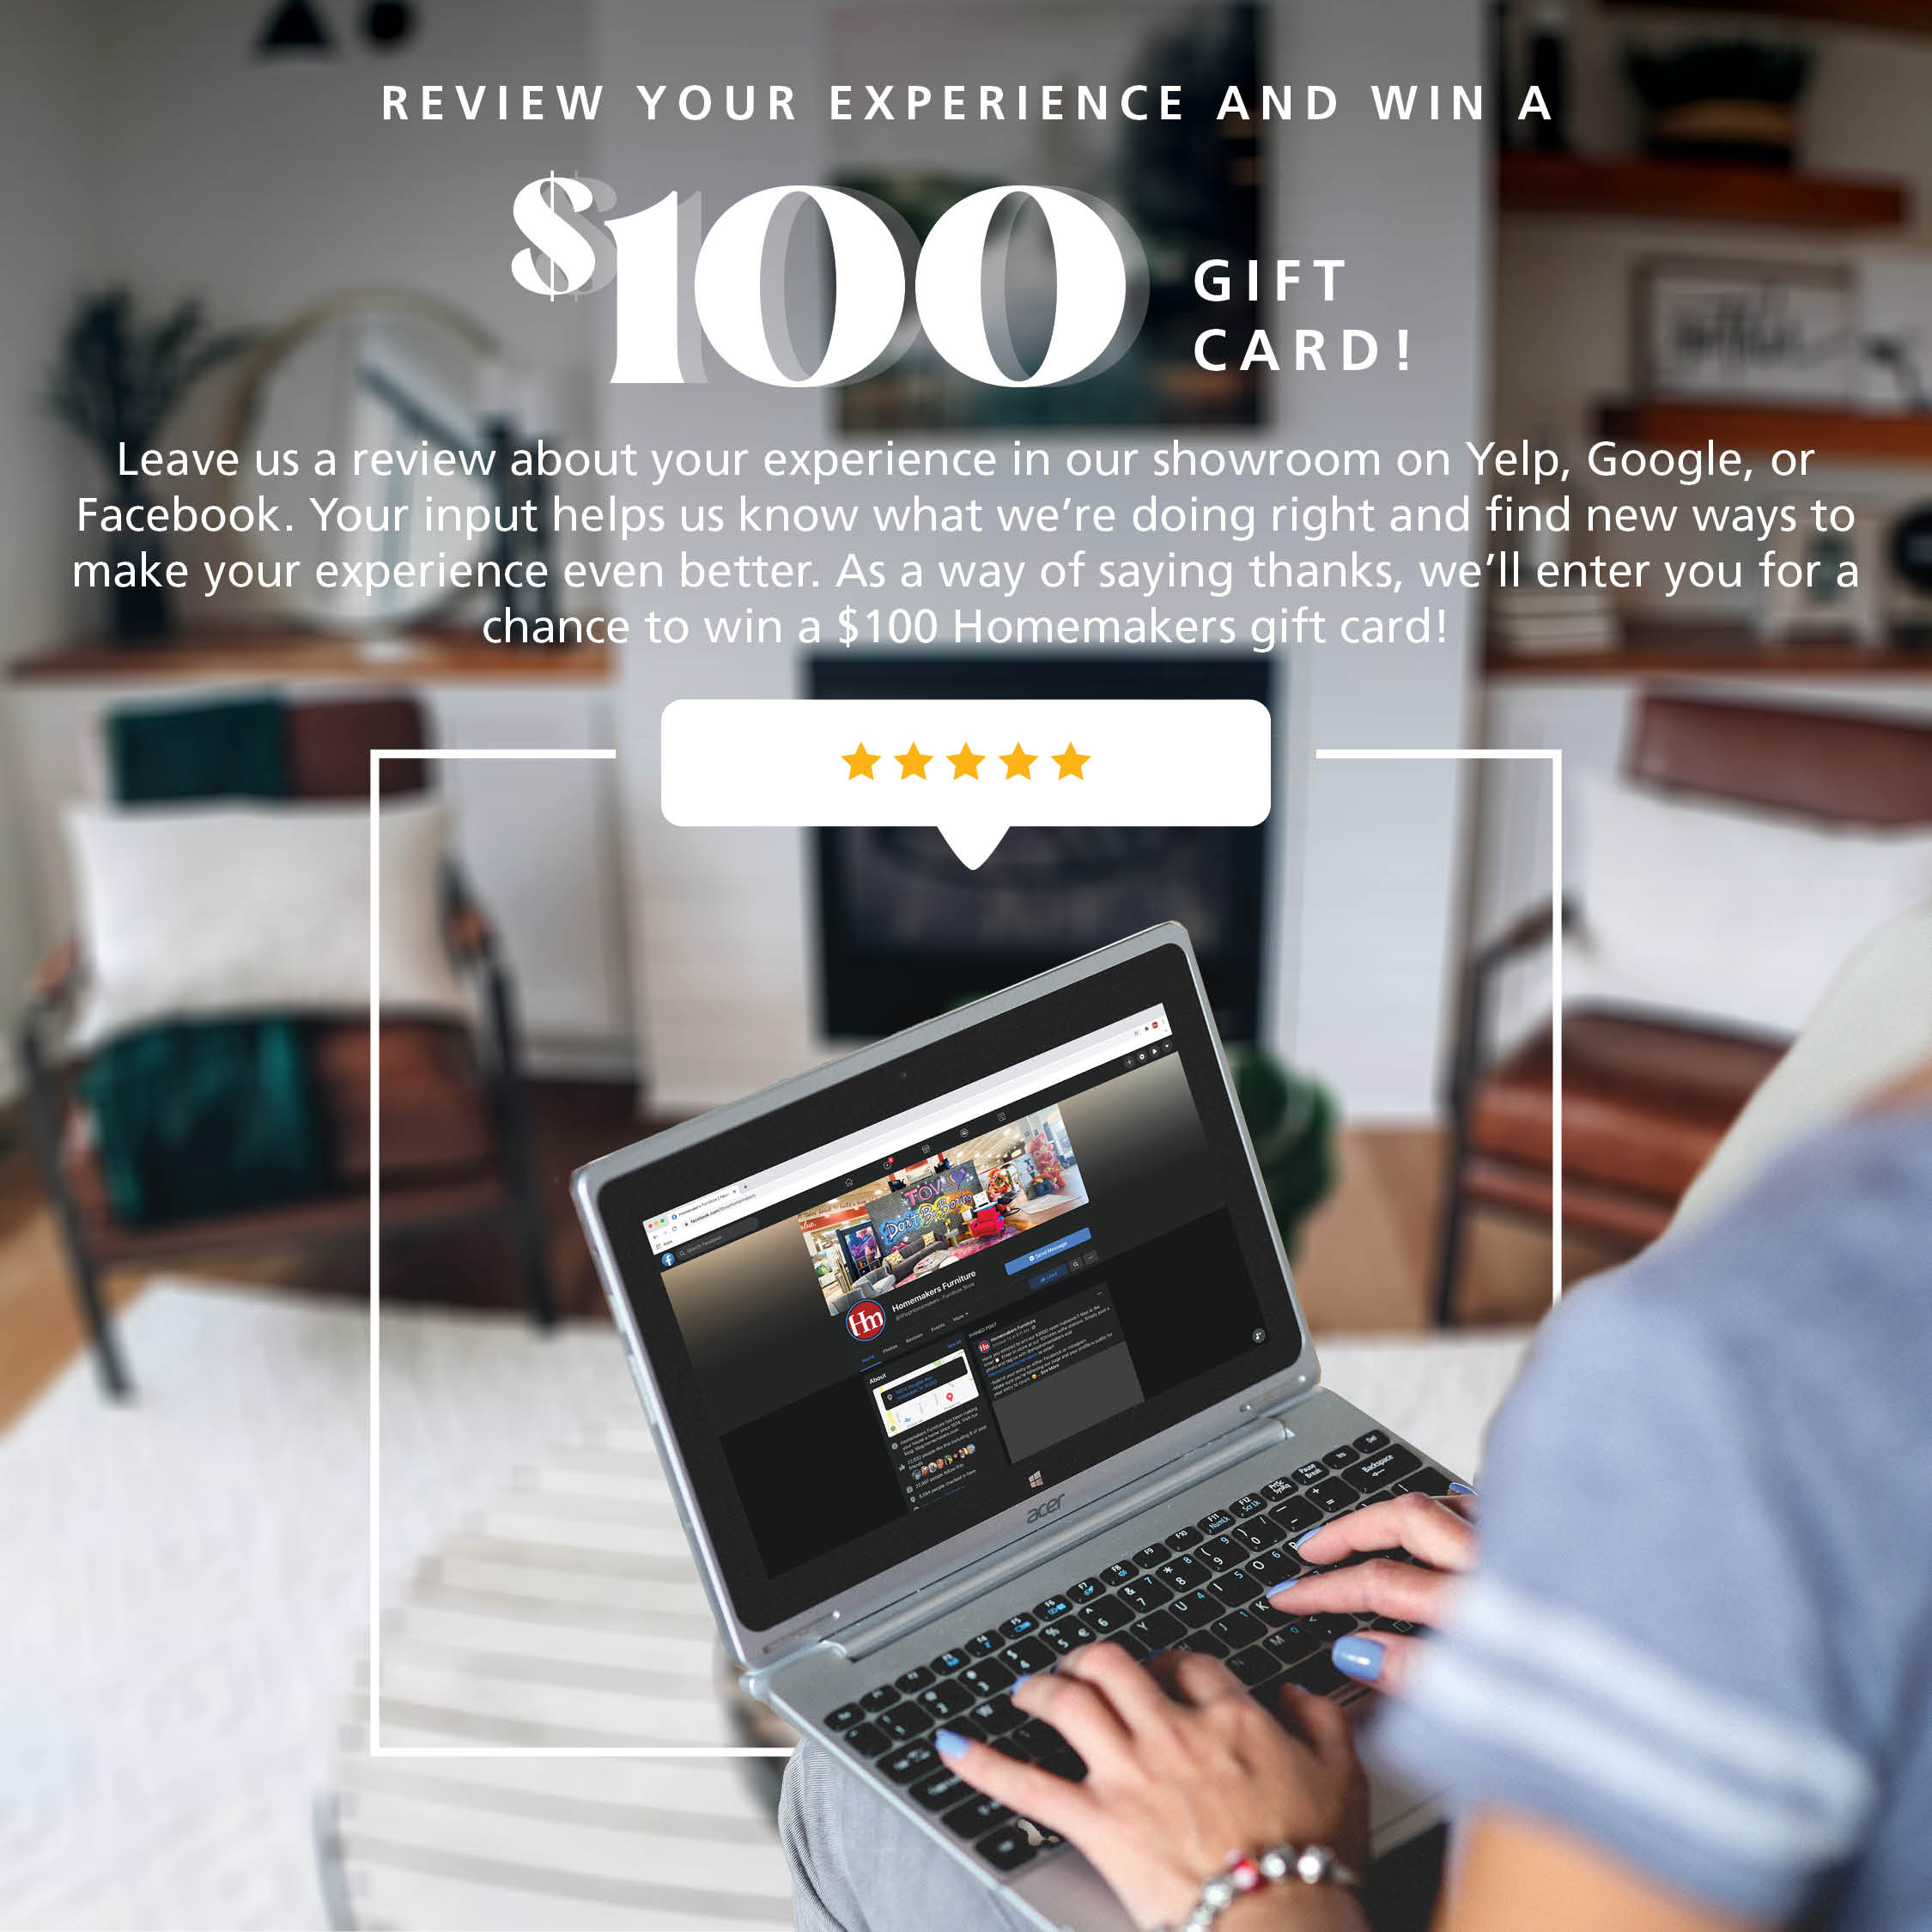 review your experience and win a $100 gift card